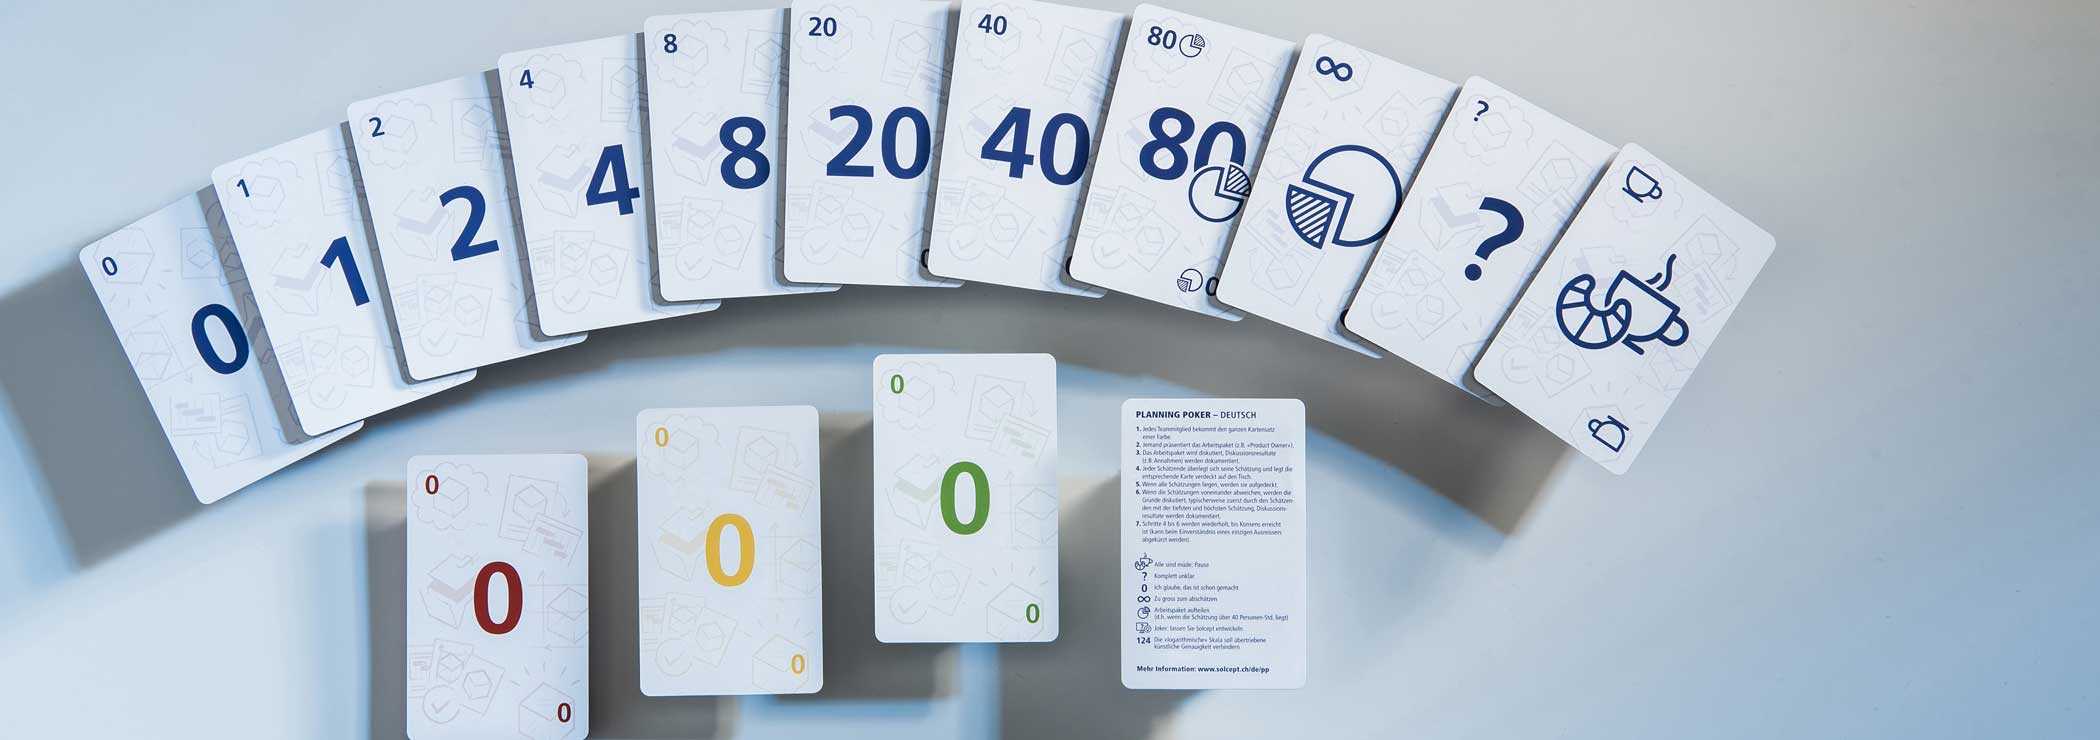 Instructions For Planning Poker Intended For Planning Poker Cards Template